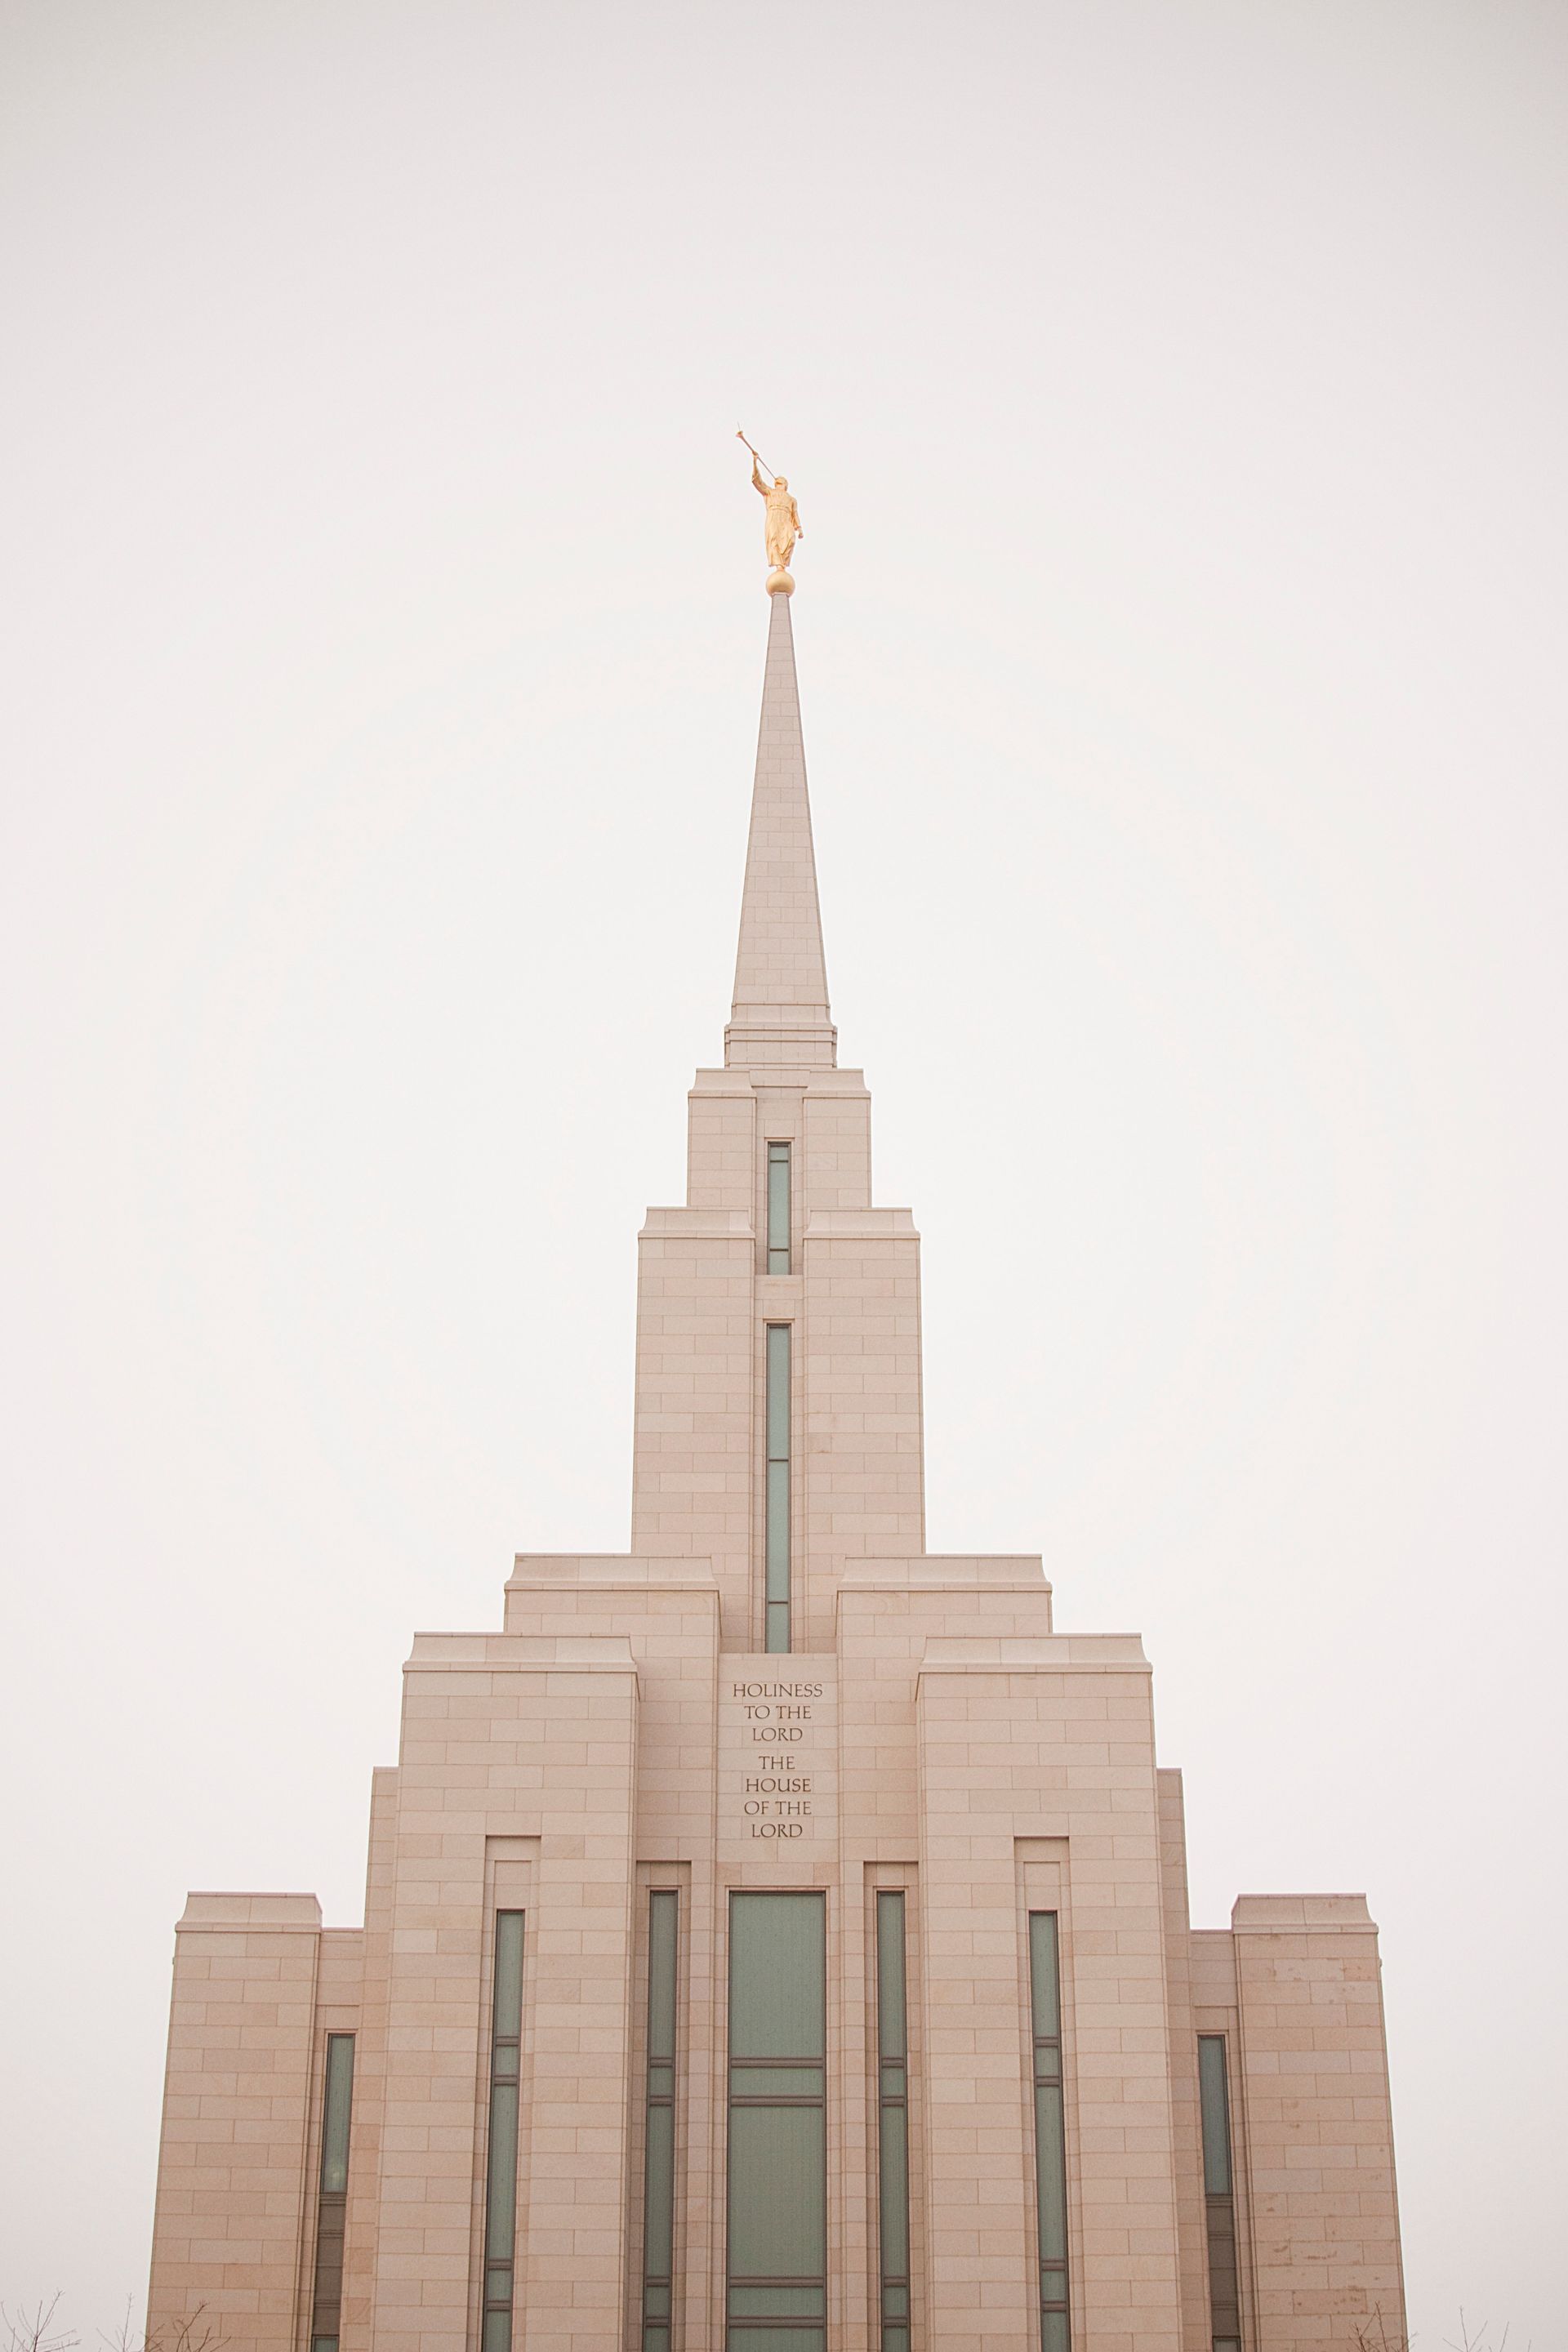 The Oquirrh Mountain Utah Temple spire, including the exterior of the temple.